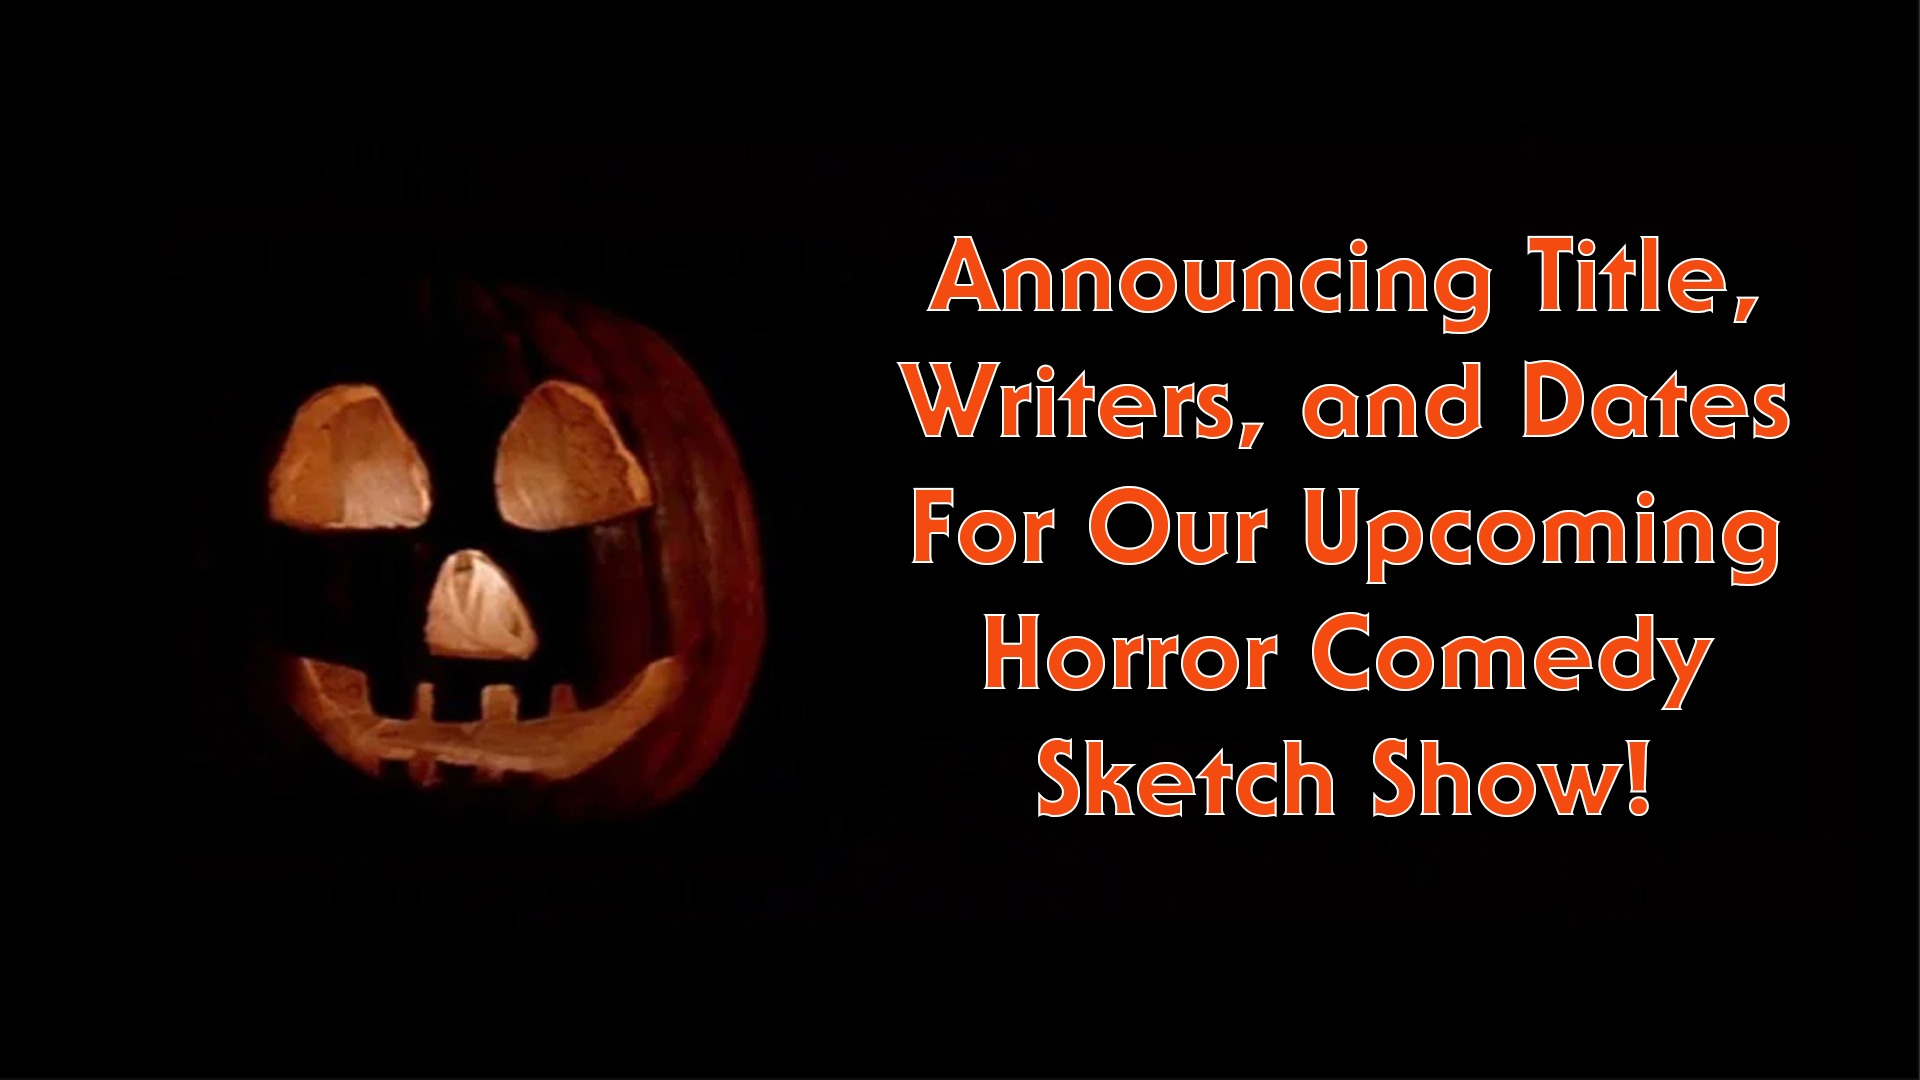 Announcing Title, Writers, and Dates for Our Upcoming Horror Comedy Sketch Show